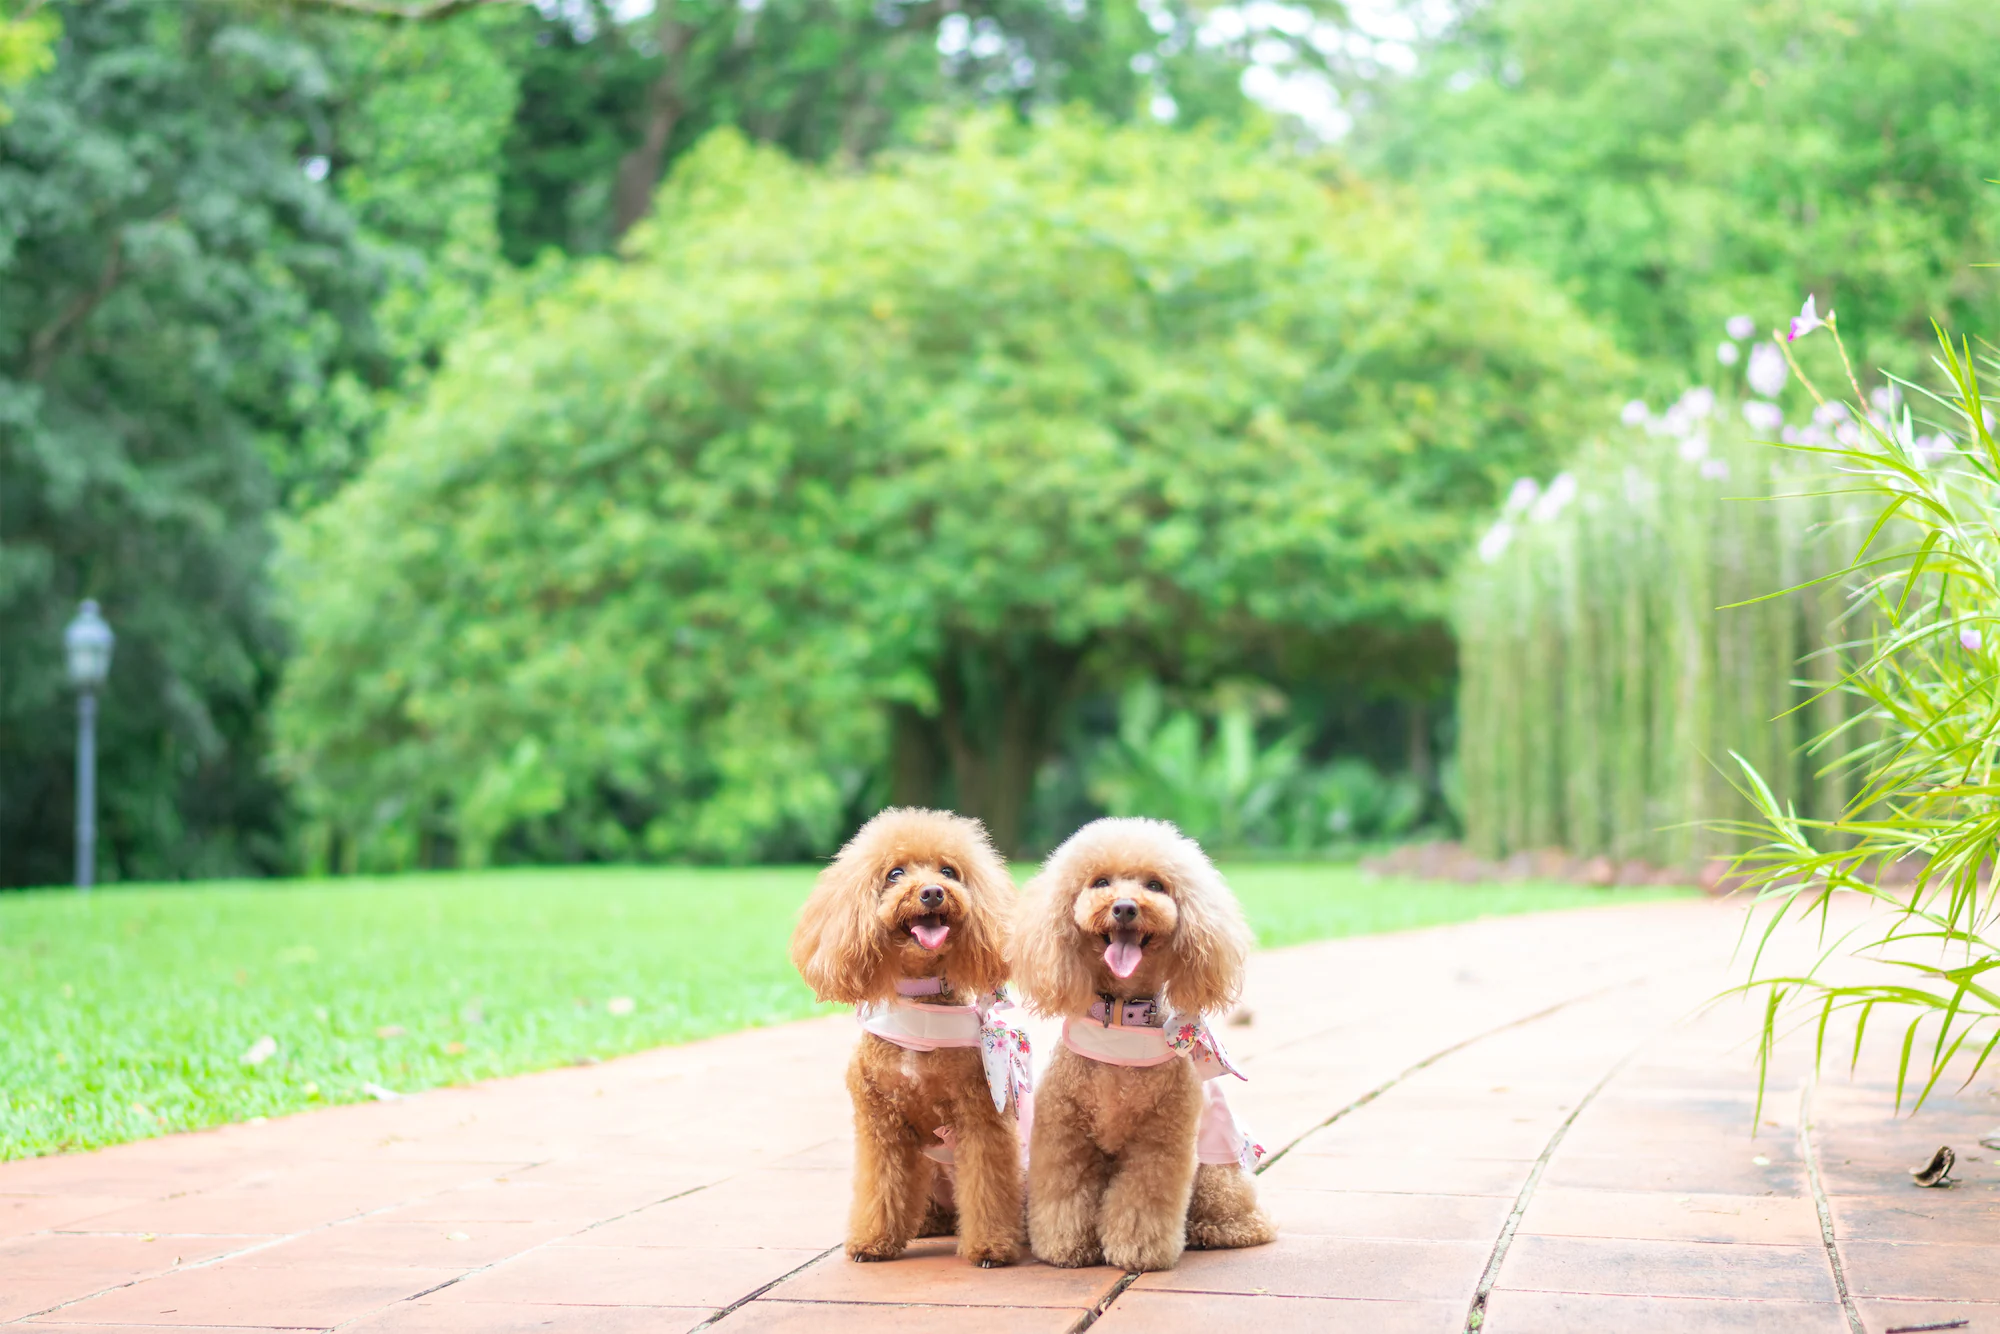 Fort Canning Centre has pretty lawns to capture your furry friends in a dog-friendly evironment with the Alpha 7R III